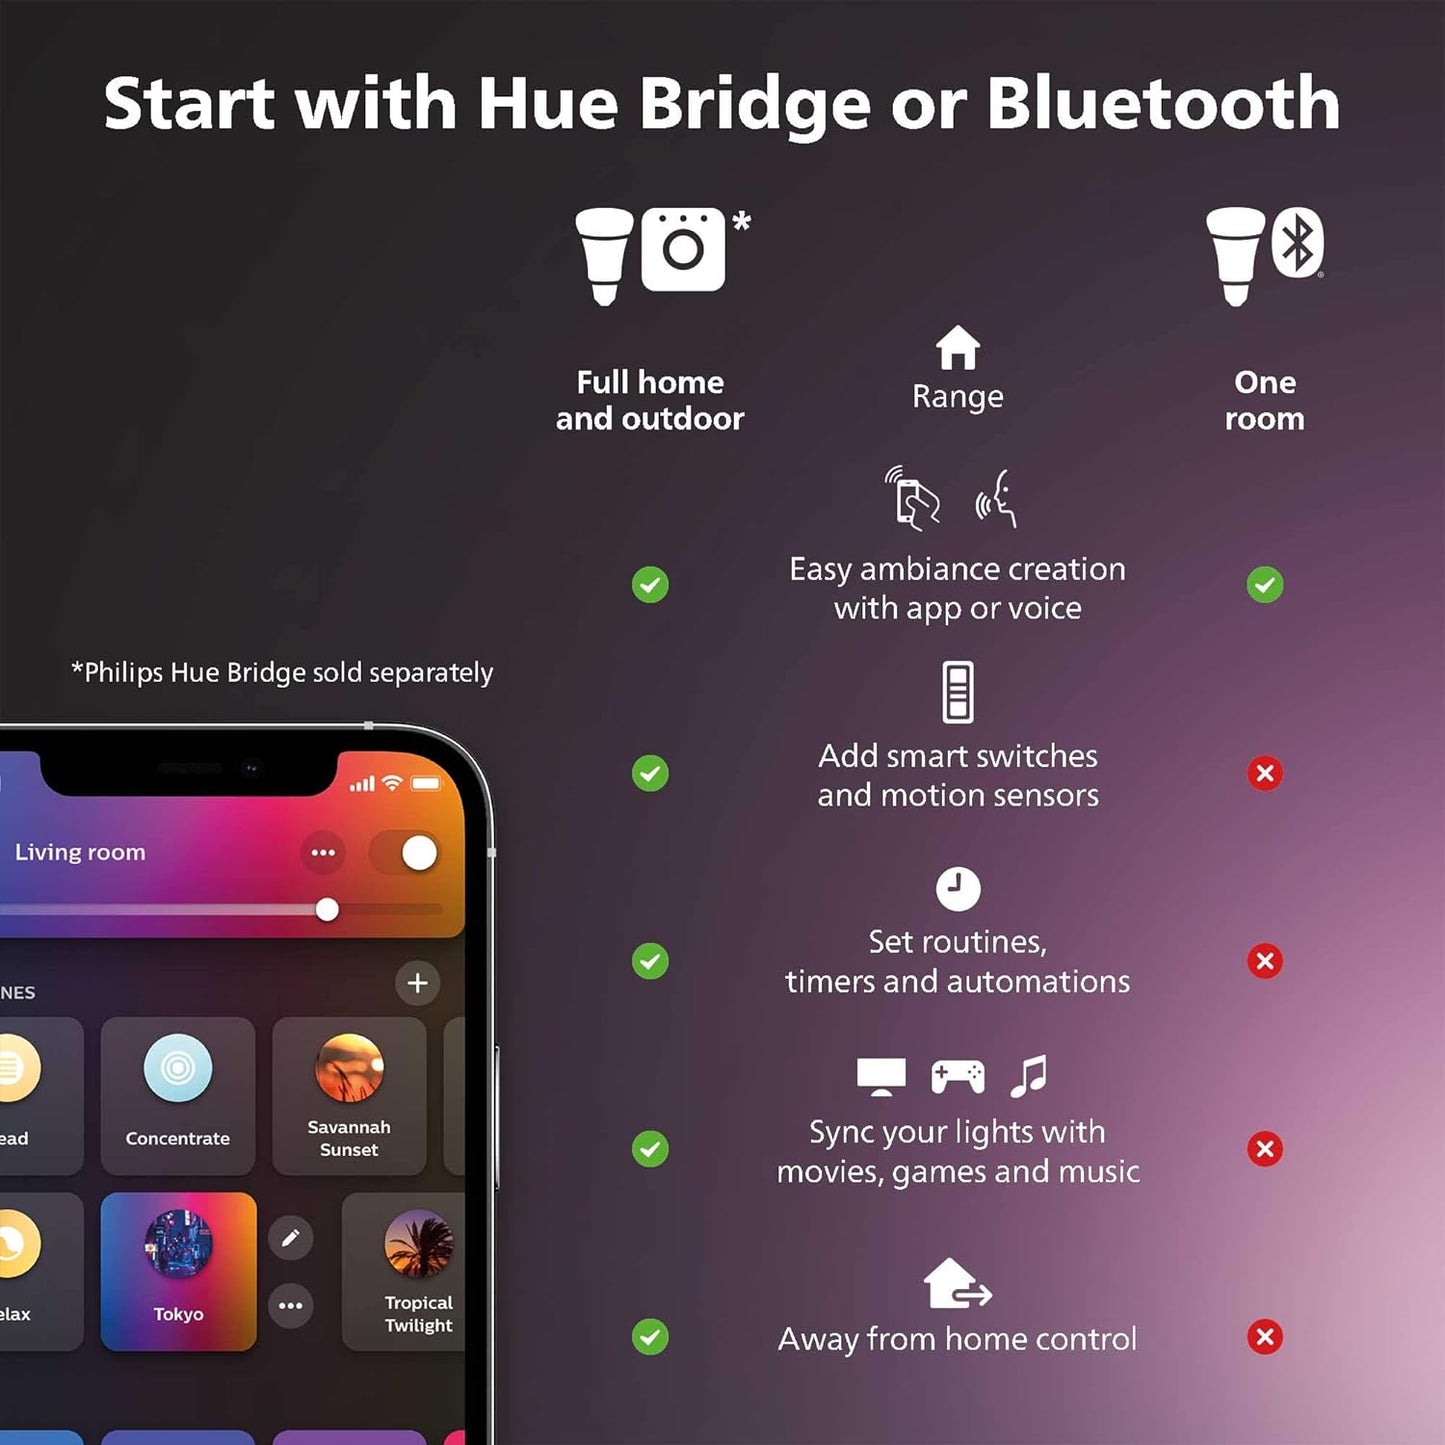 Philips Hue Smart 60W A19 LED Bulb - White and Color Ambiance Color-Changing Light - 1 Pack - 800LM - E26 - Indoor - Control with Hue App - Works with Alexa, Google Assistant and Apple Homekit